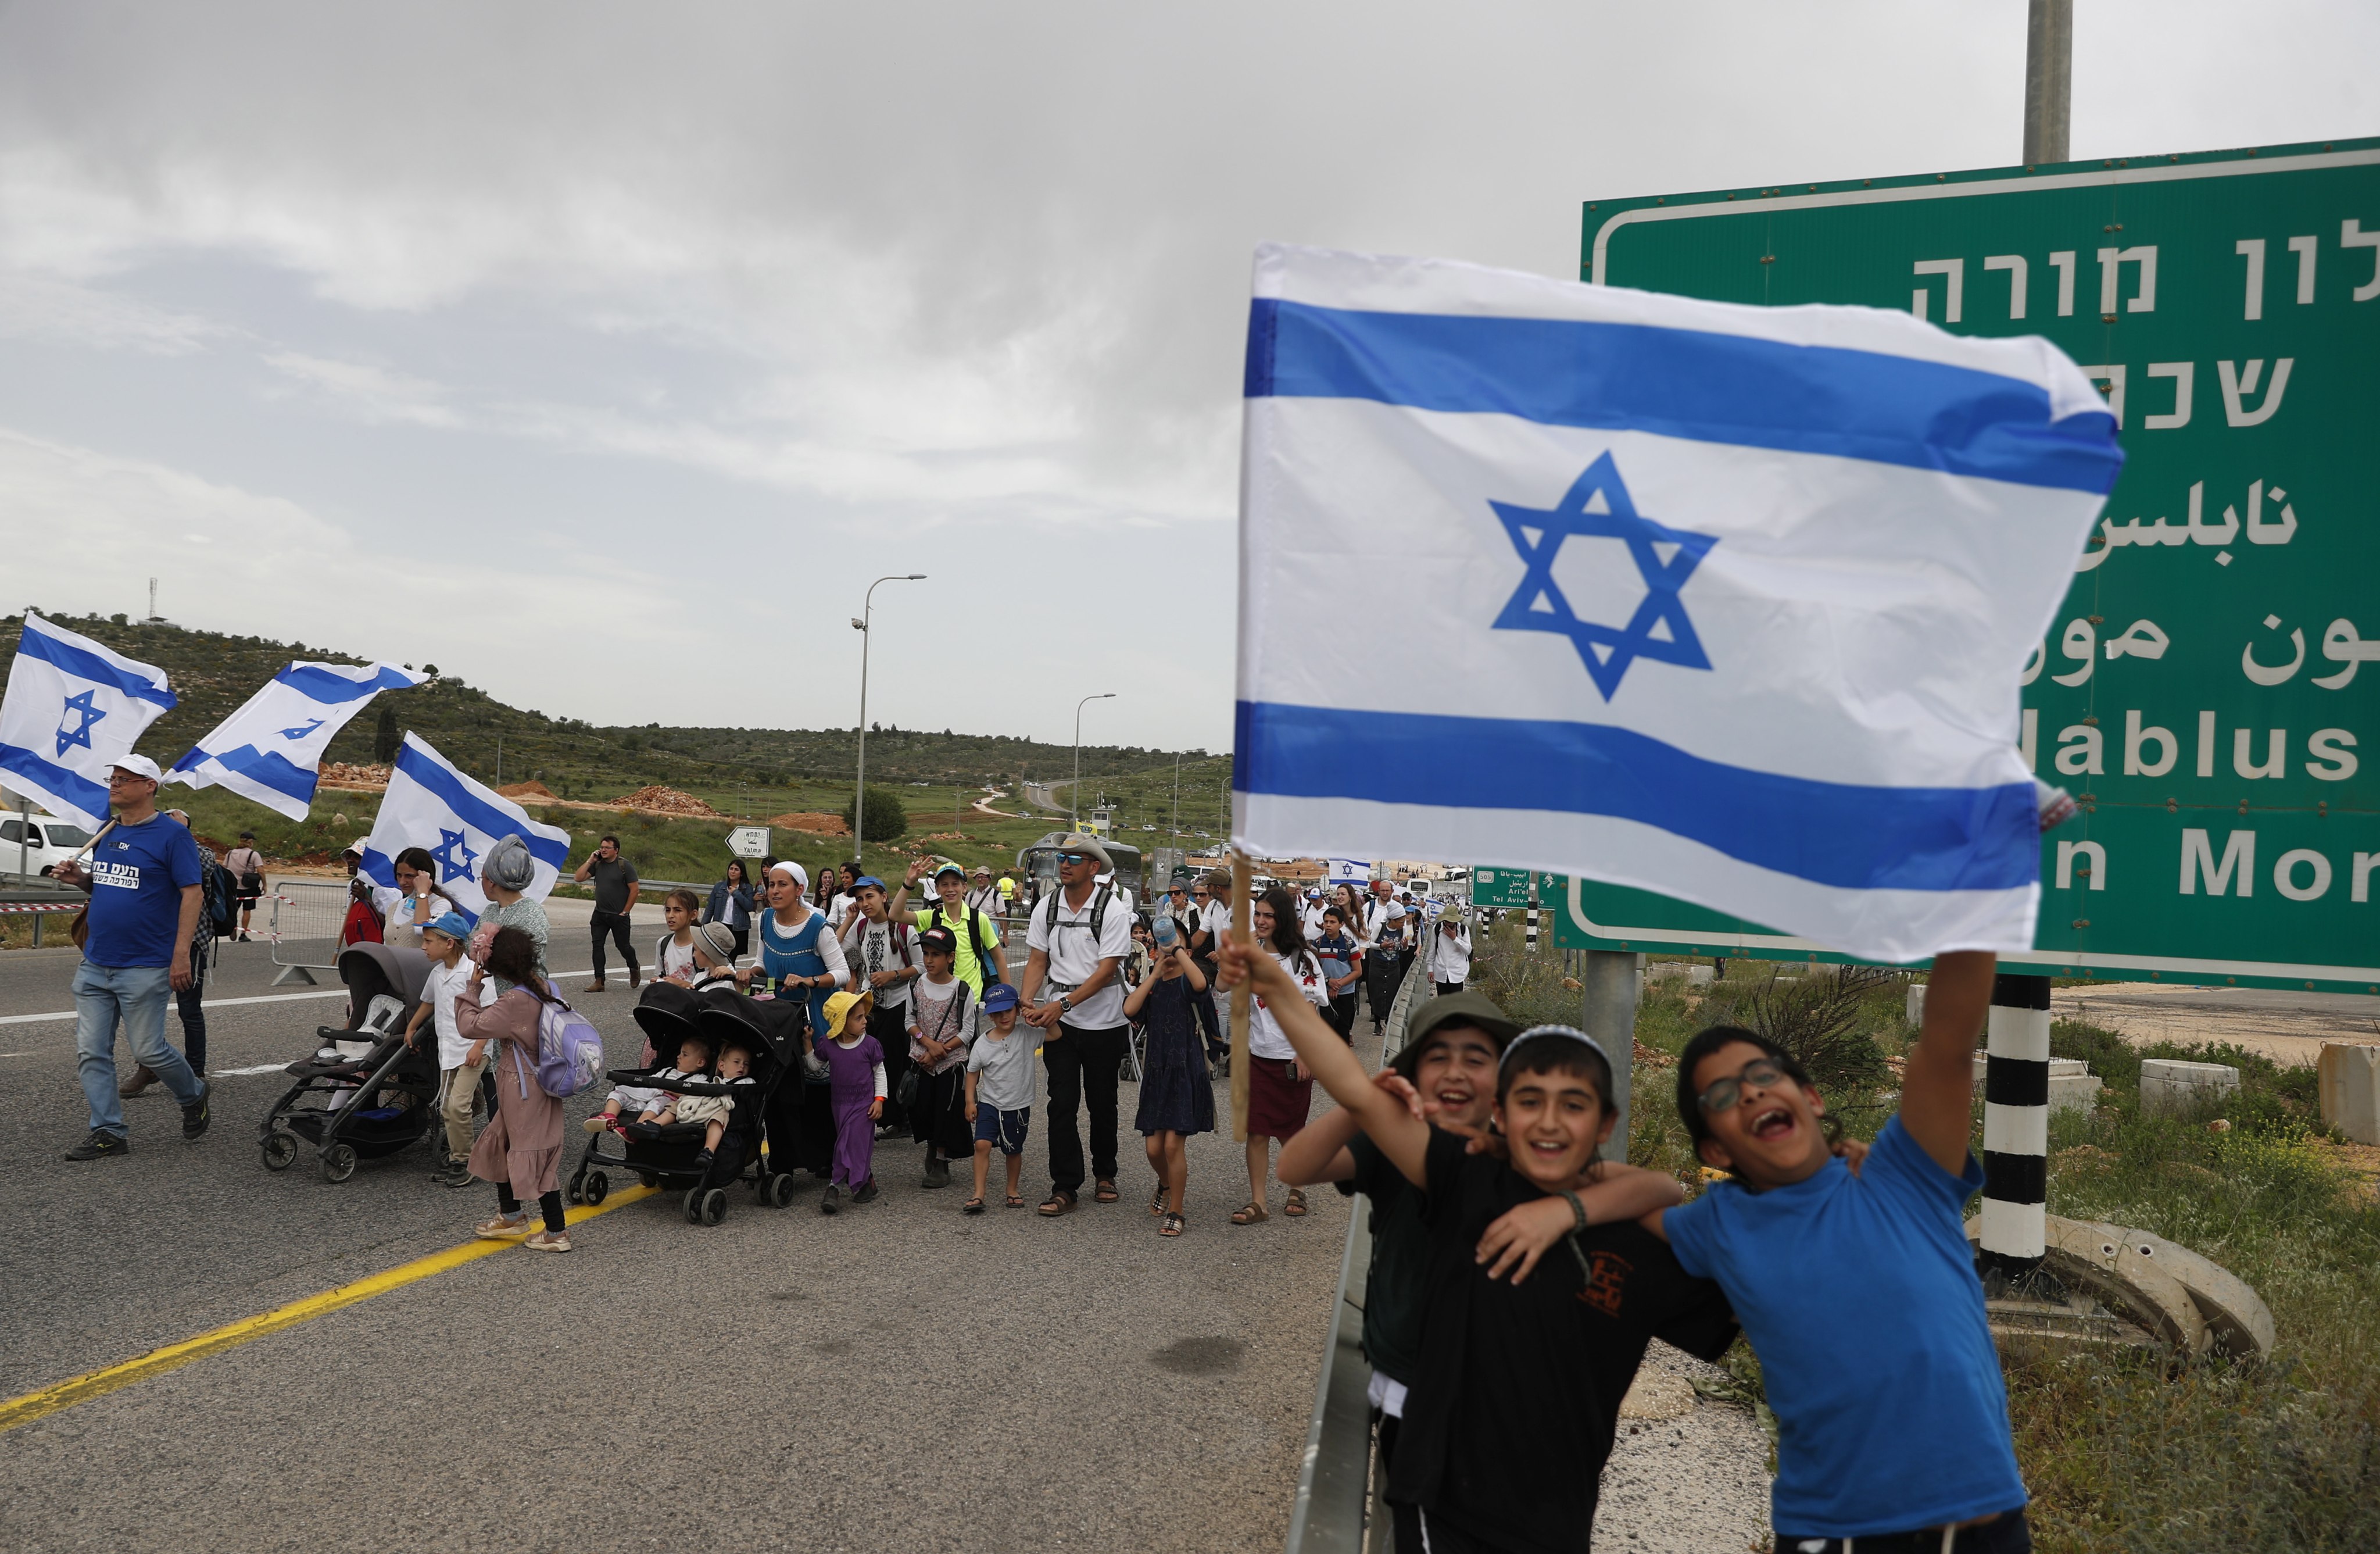 Israeli far-right supporters wave national flags as they march during a rally near the illegal outpost of Avitar, near the West Bank city of Nablus, on Monday. Photo: EPA-EFE